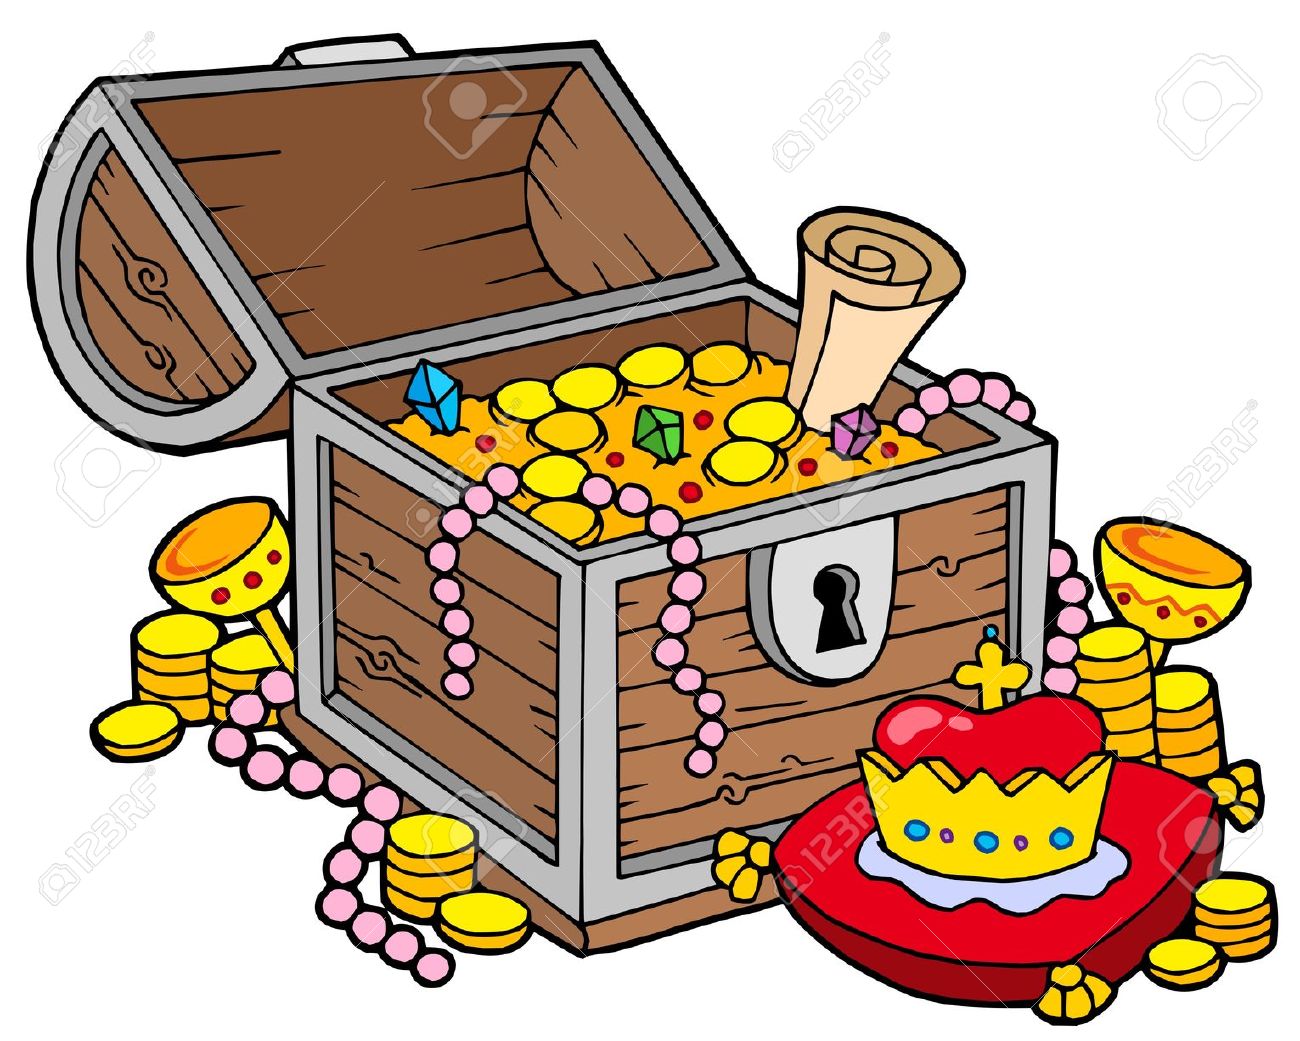 free clipart images treasure chest - photo #43